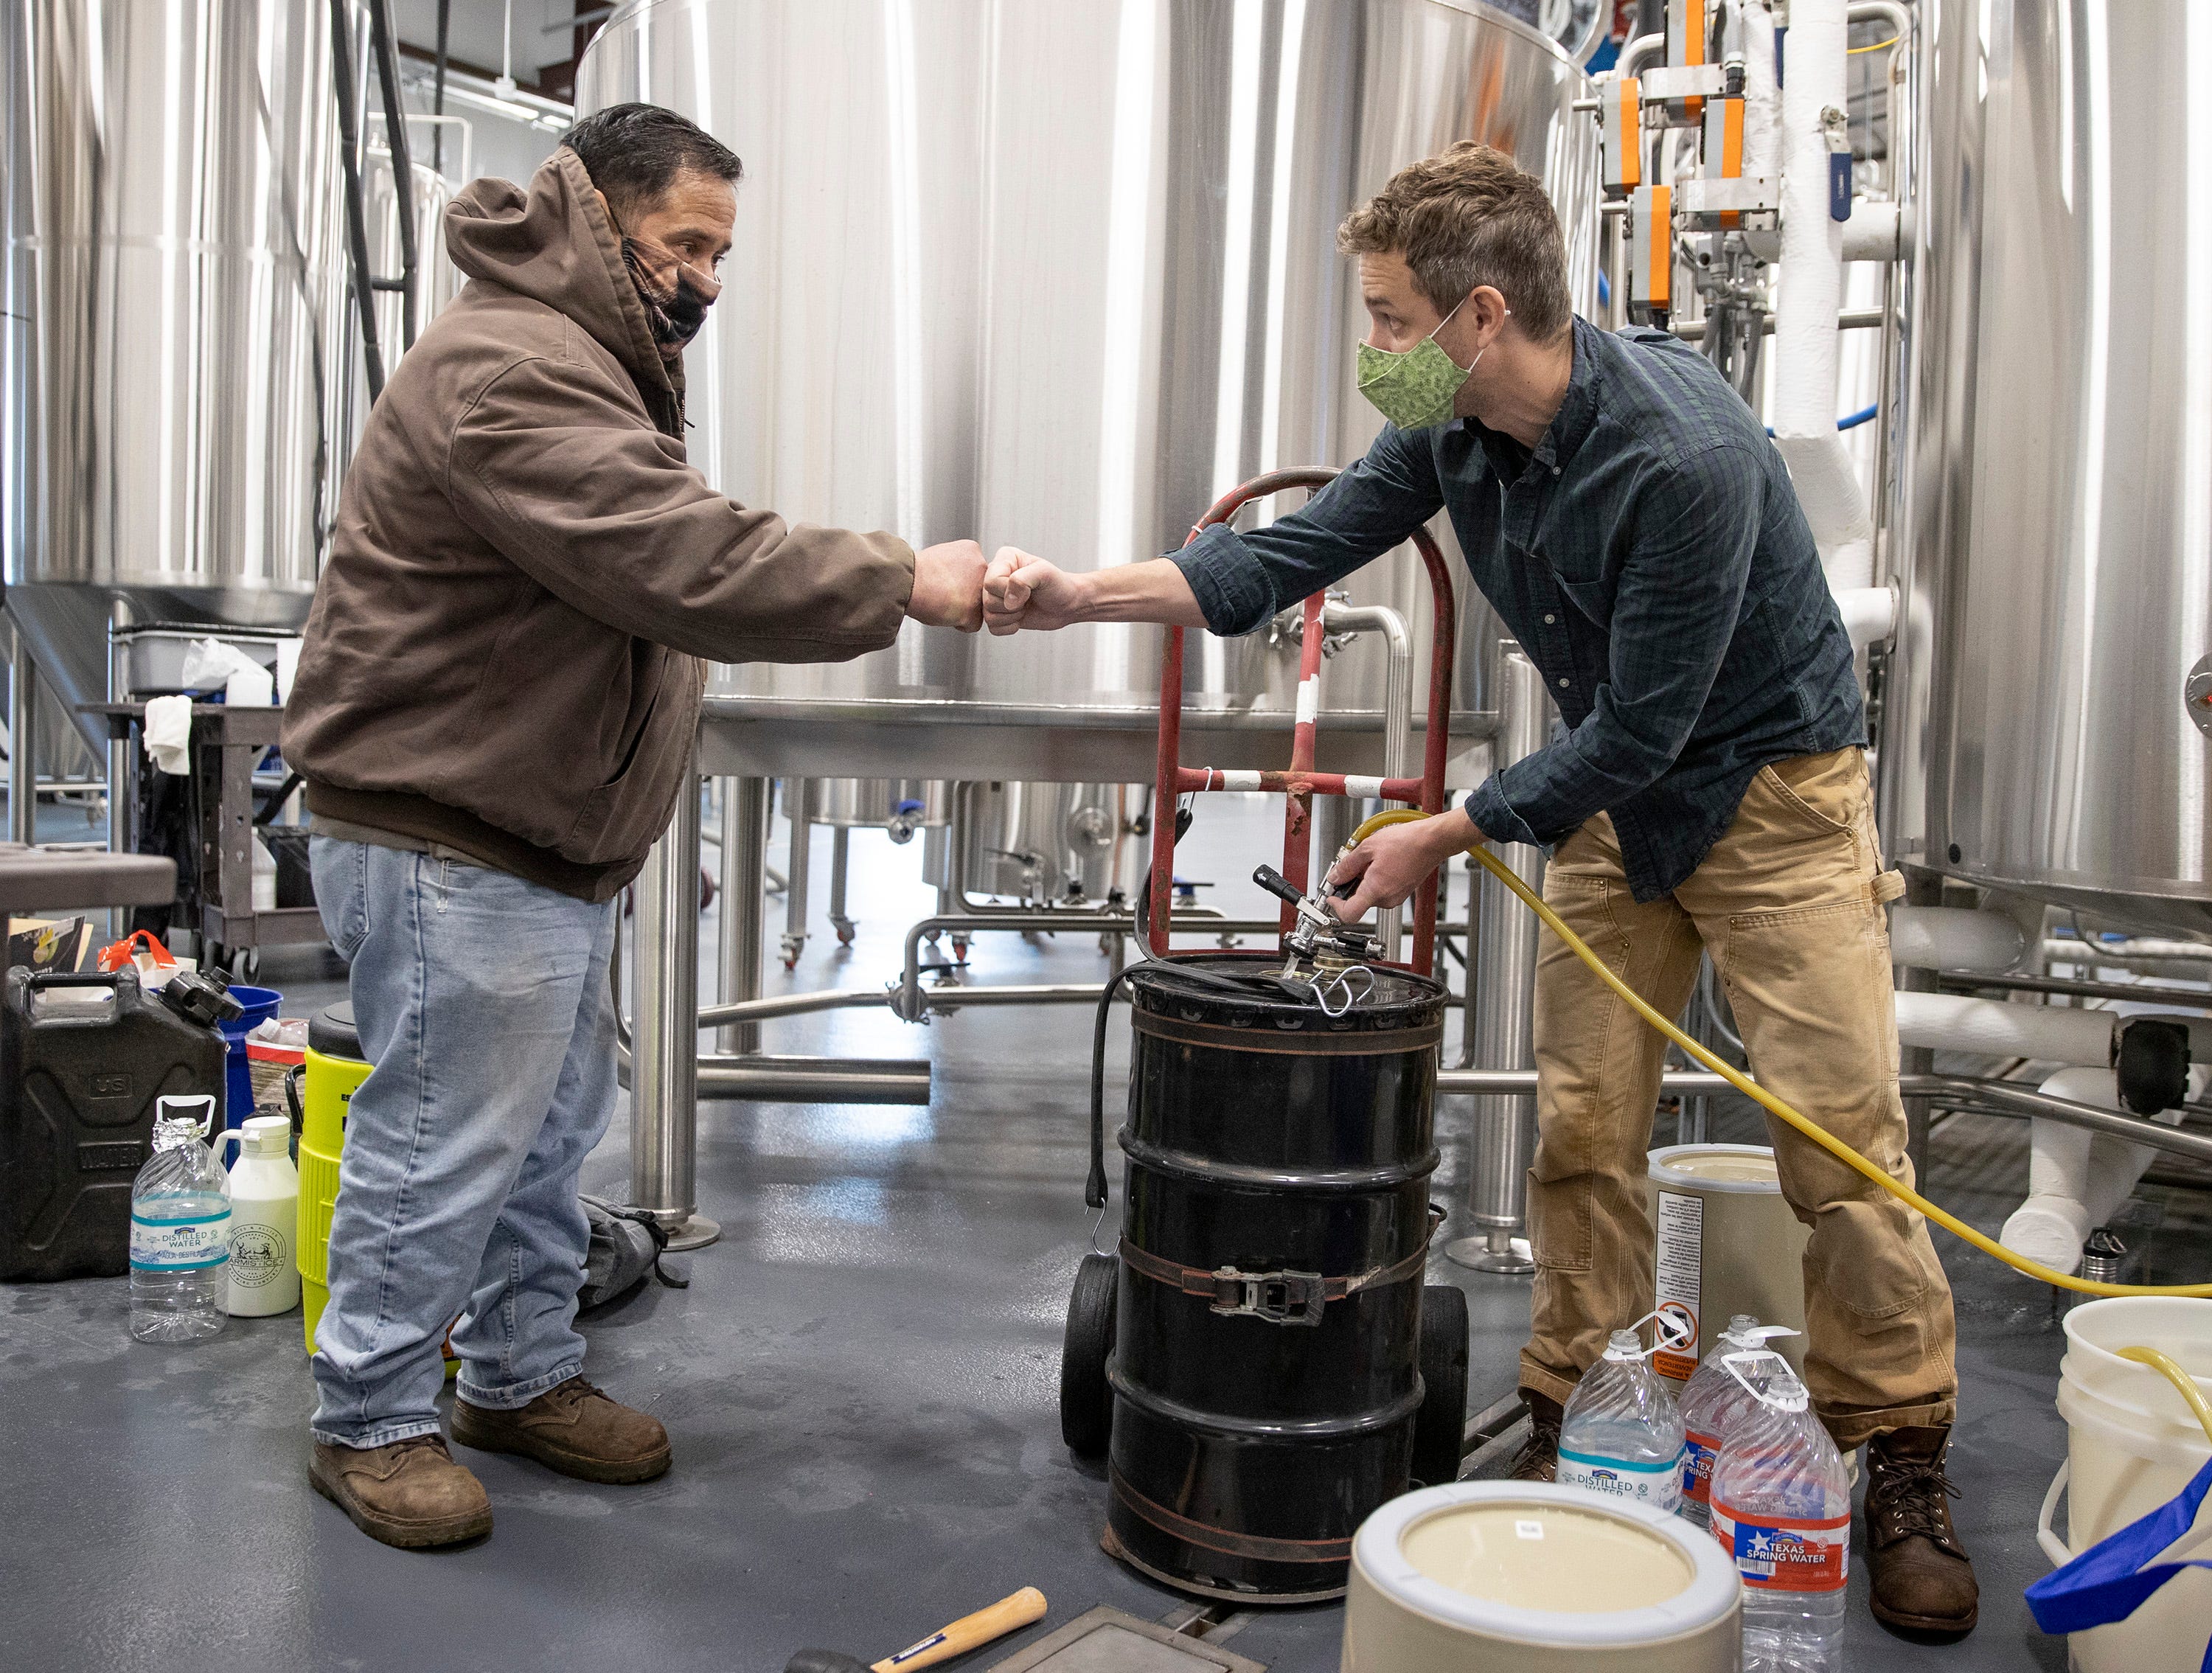 Will Jaquiss, right, the owner of Meanwhile Brewing Co., fills a container with water for Victor Perez on Friday during a citywide boil water notice. The brewery in Southeast Austin gave away all 4,000 gallons of their water to people in need on Thursday and Friday.